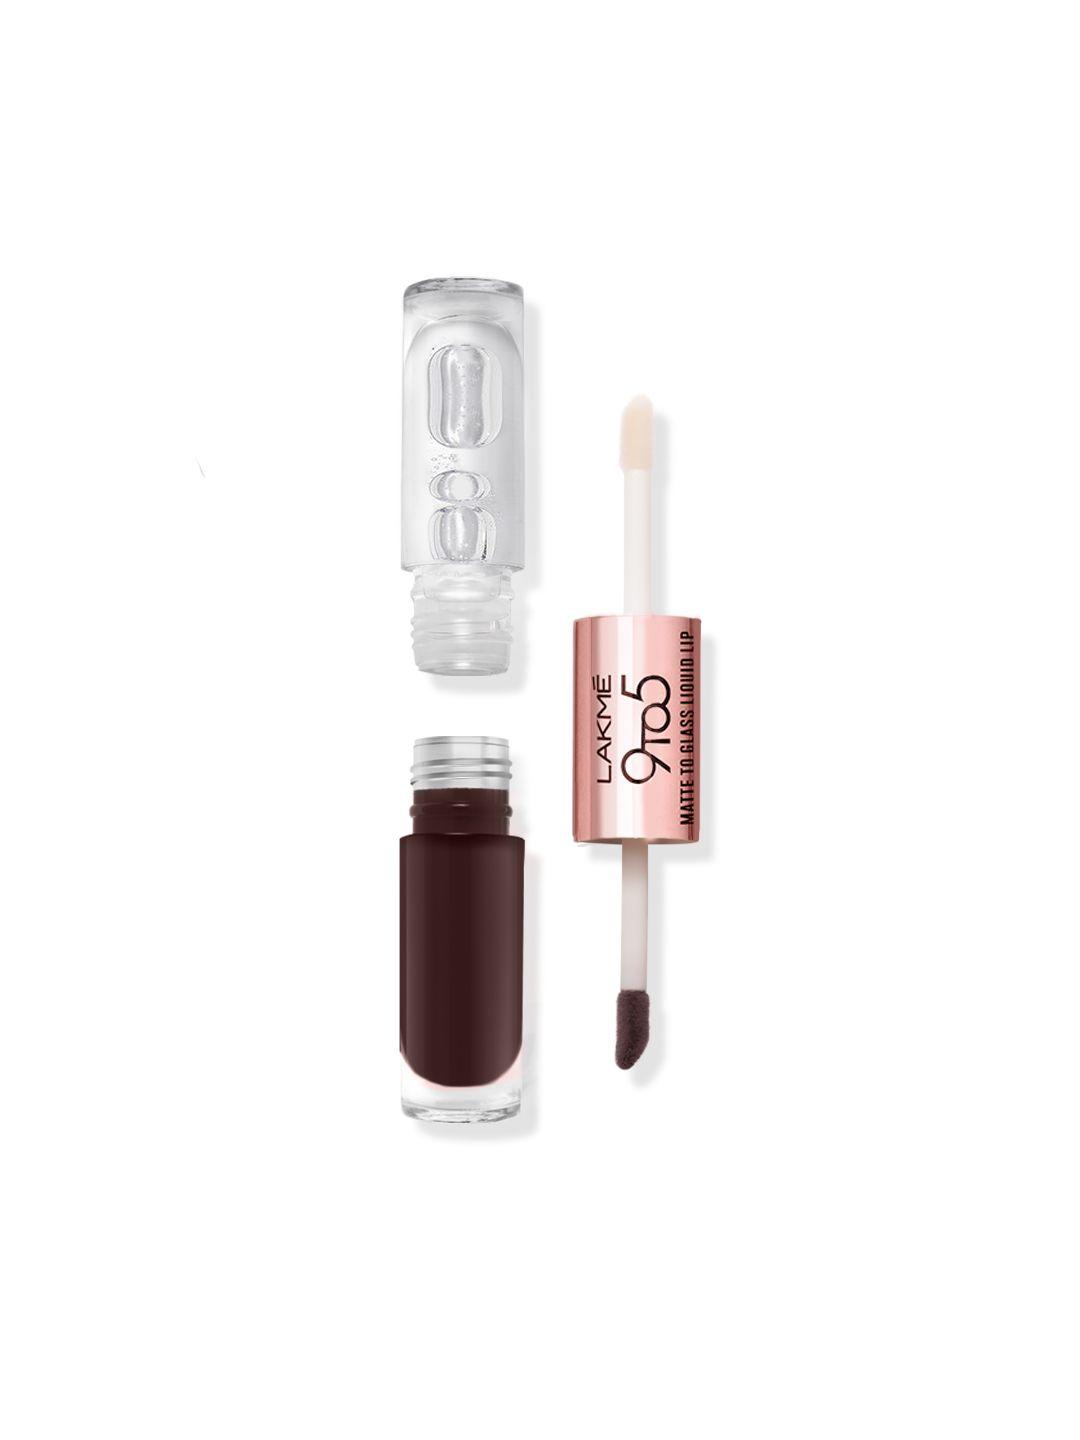 lakme 9to5 matte to glass transfer-proof liquid lip color 7.6ml - brown sugar